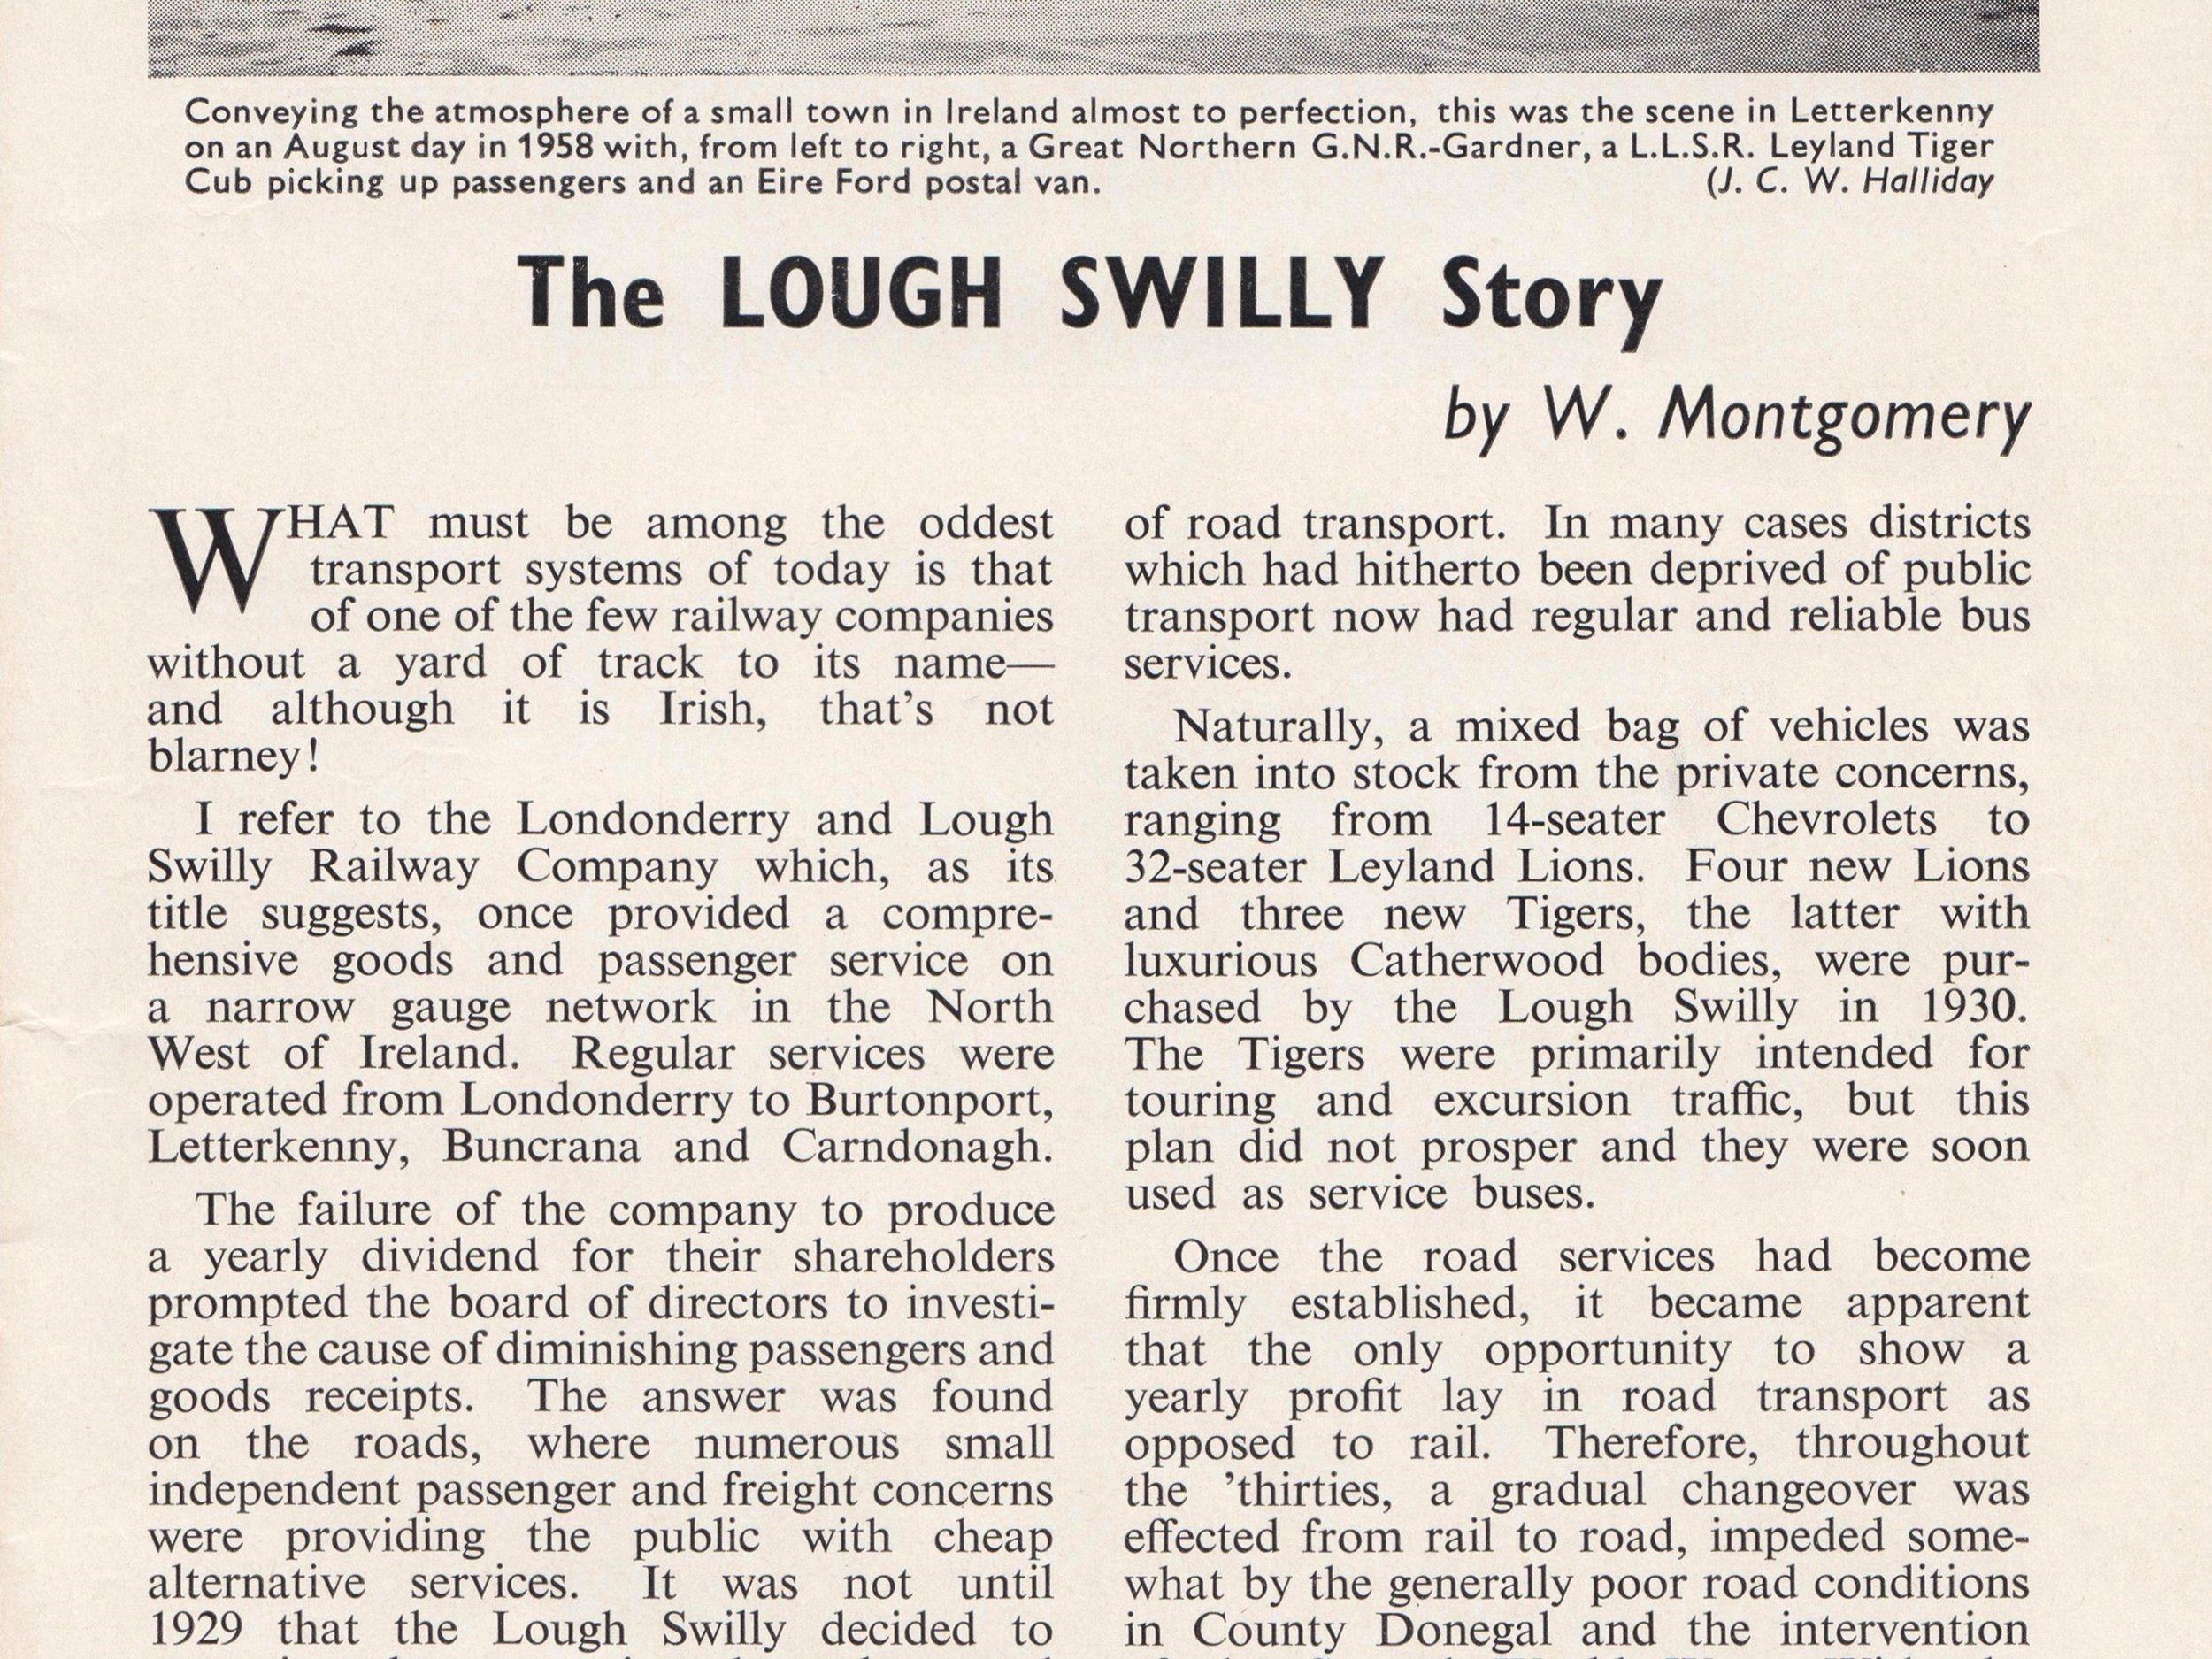 The+Lough+Swilly+Story+1+-+Extract+from+Buses+Illustrated+magazine+1960.jpg